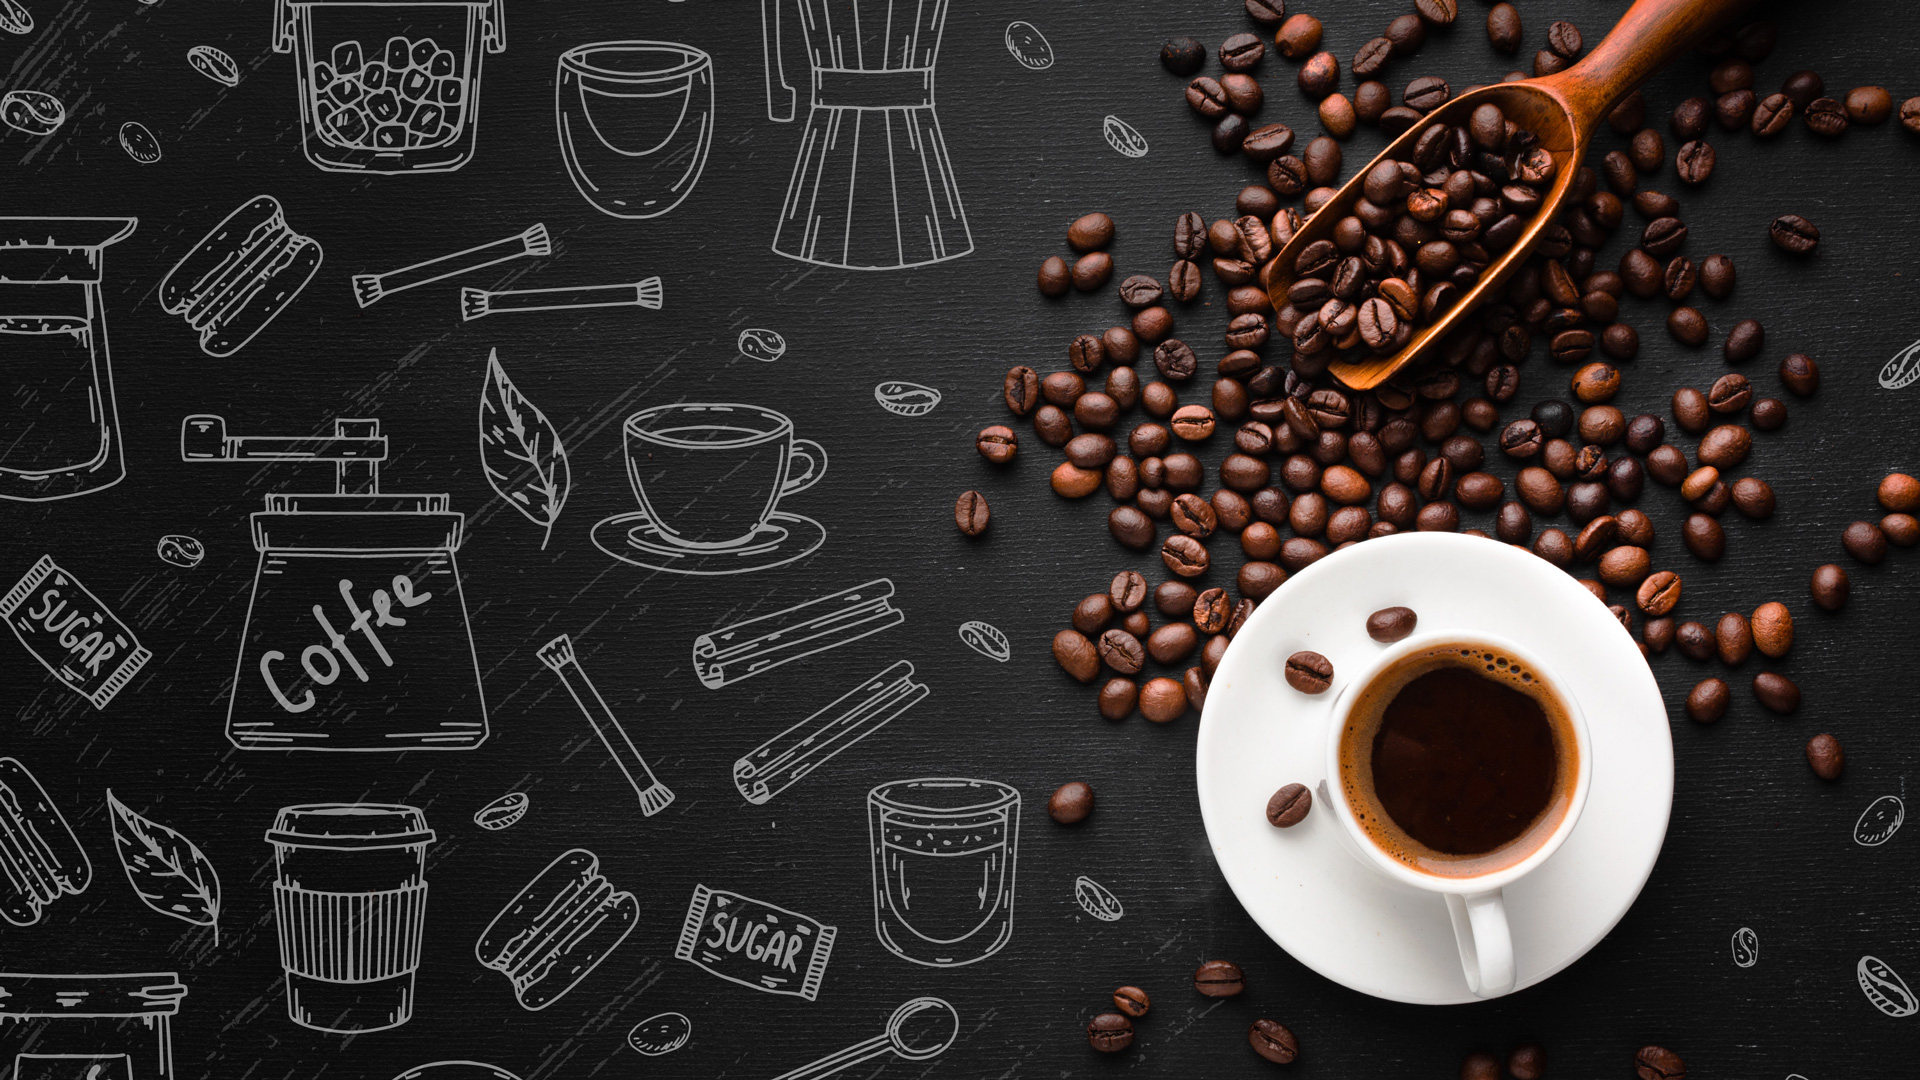 Coffee beans and cup of coffee on a black background with coffee illustrations